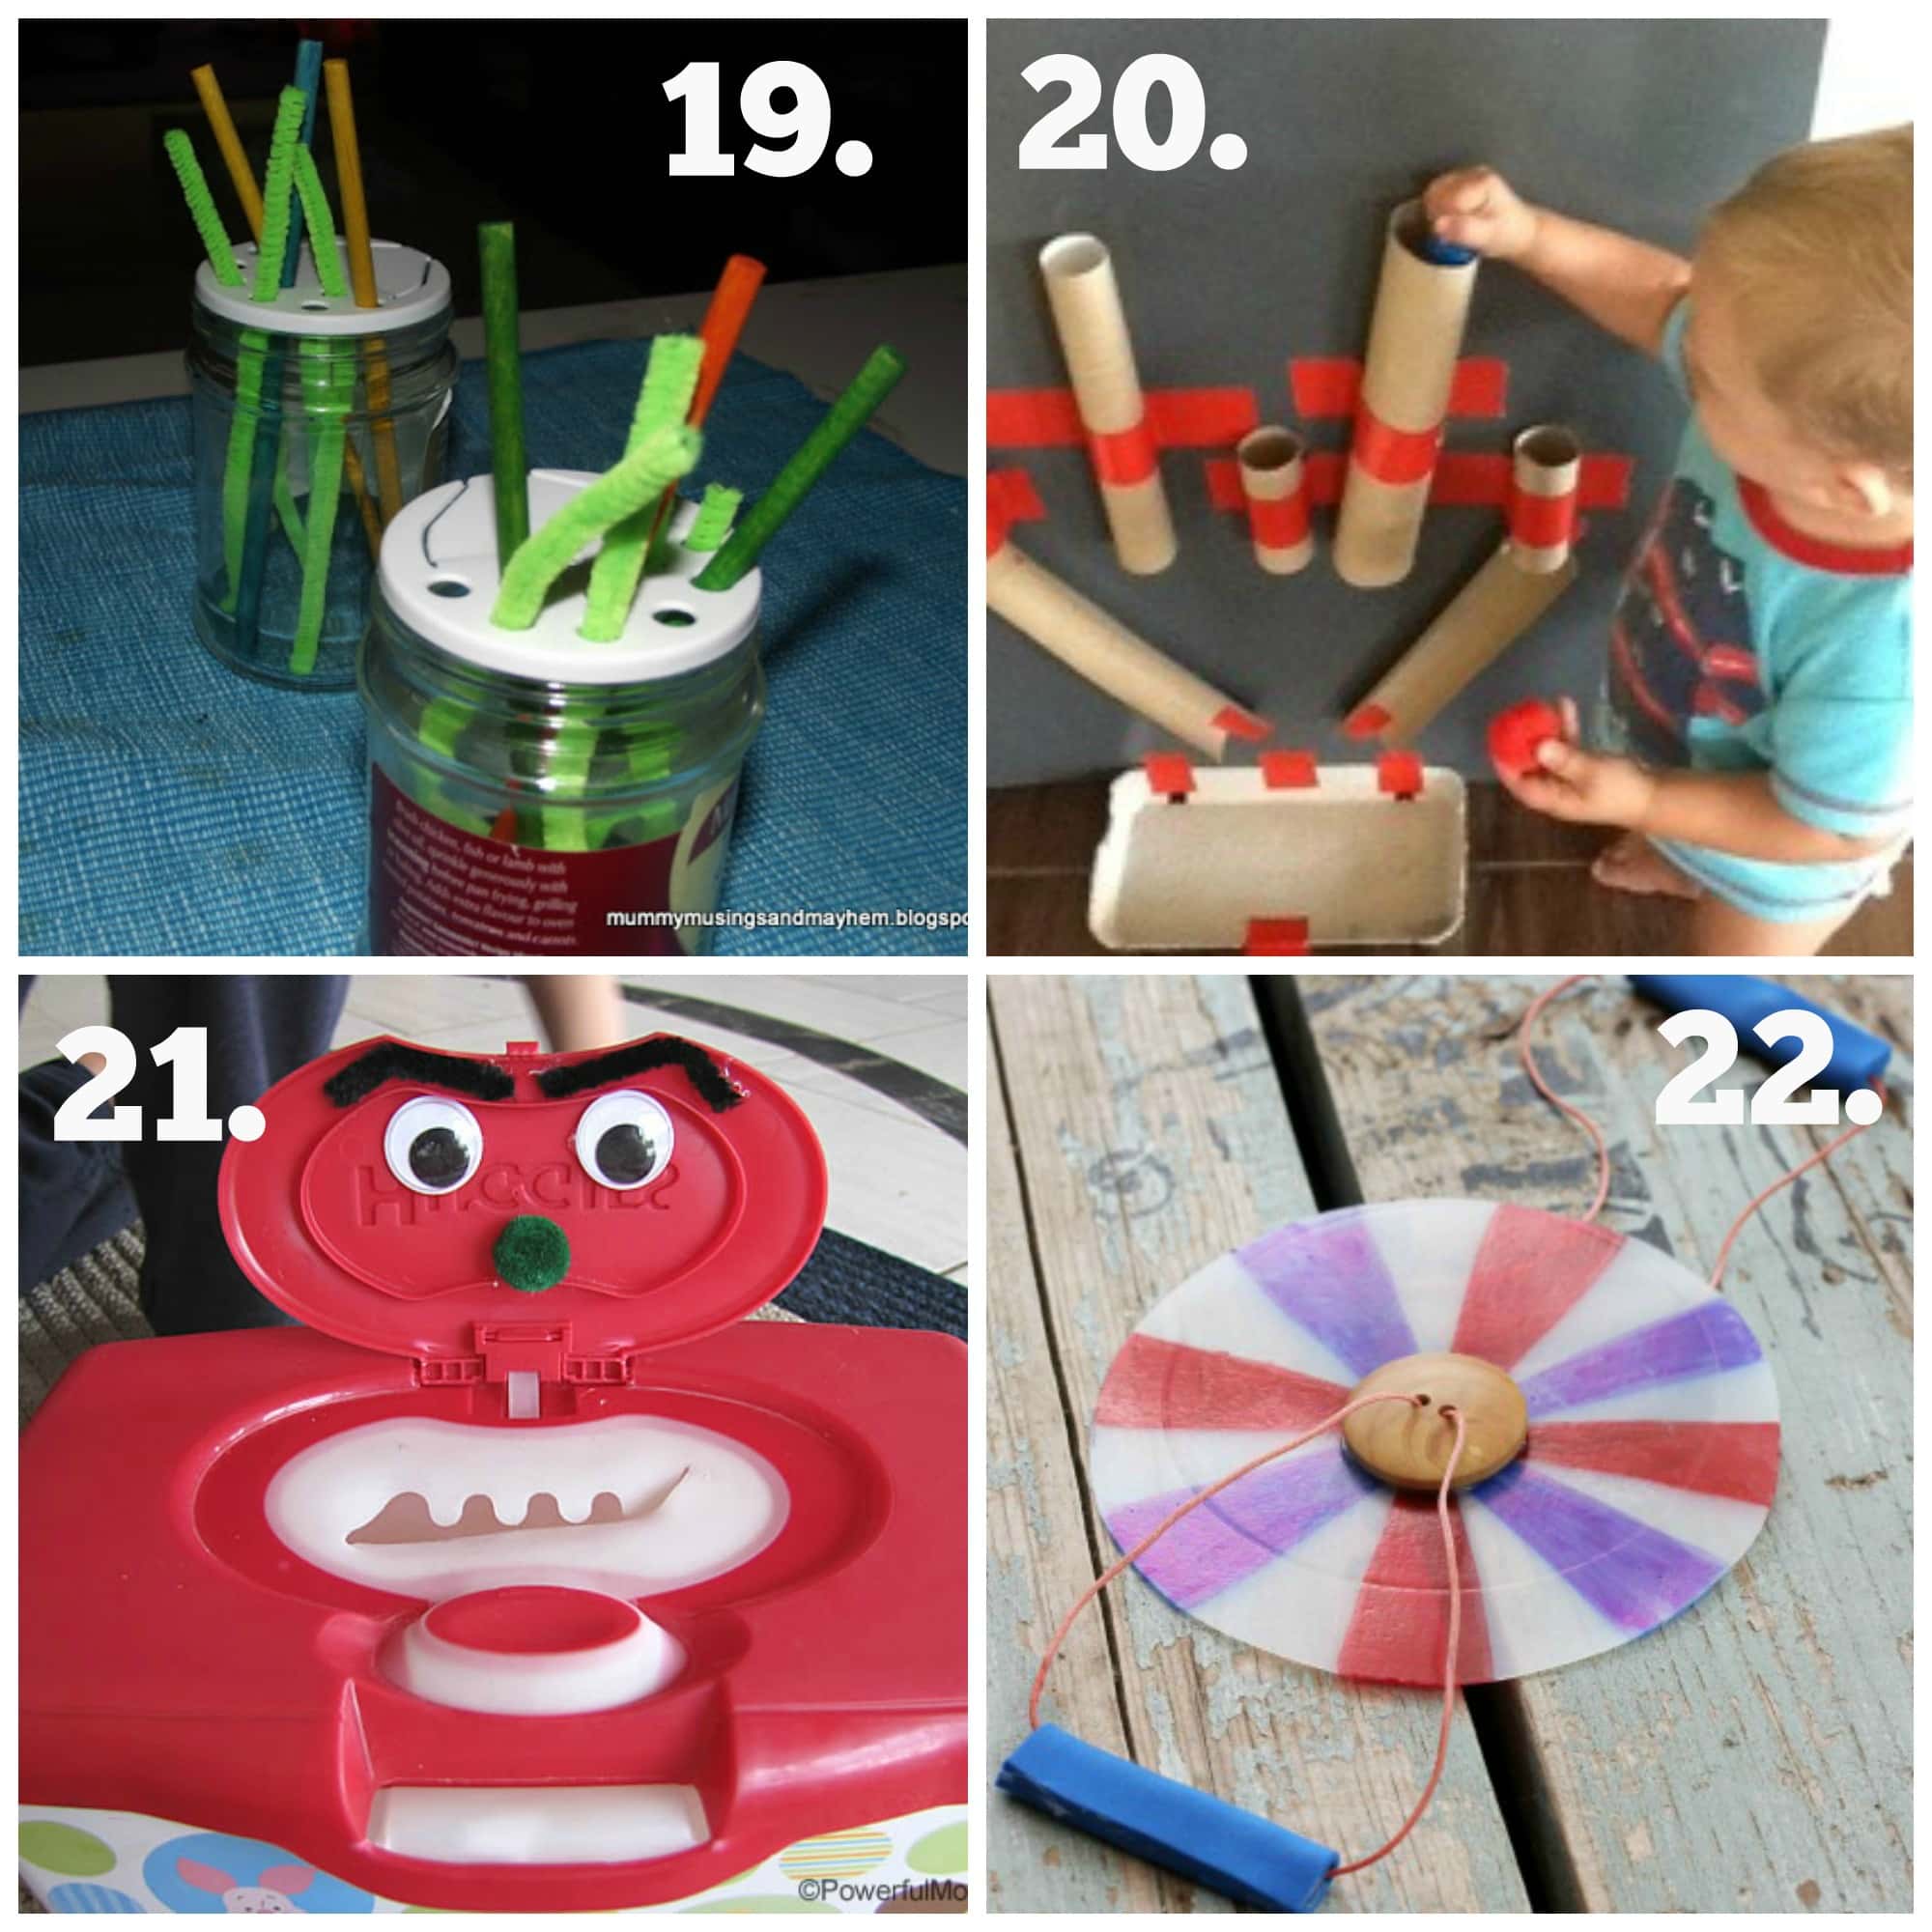 30 easy ideas to make your own baby and toddler toys using recycled materials from around the home. #3 in the Mummy Musings and Mayhem Recycled Play Series!